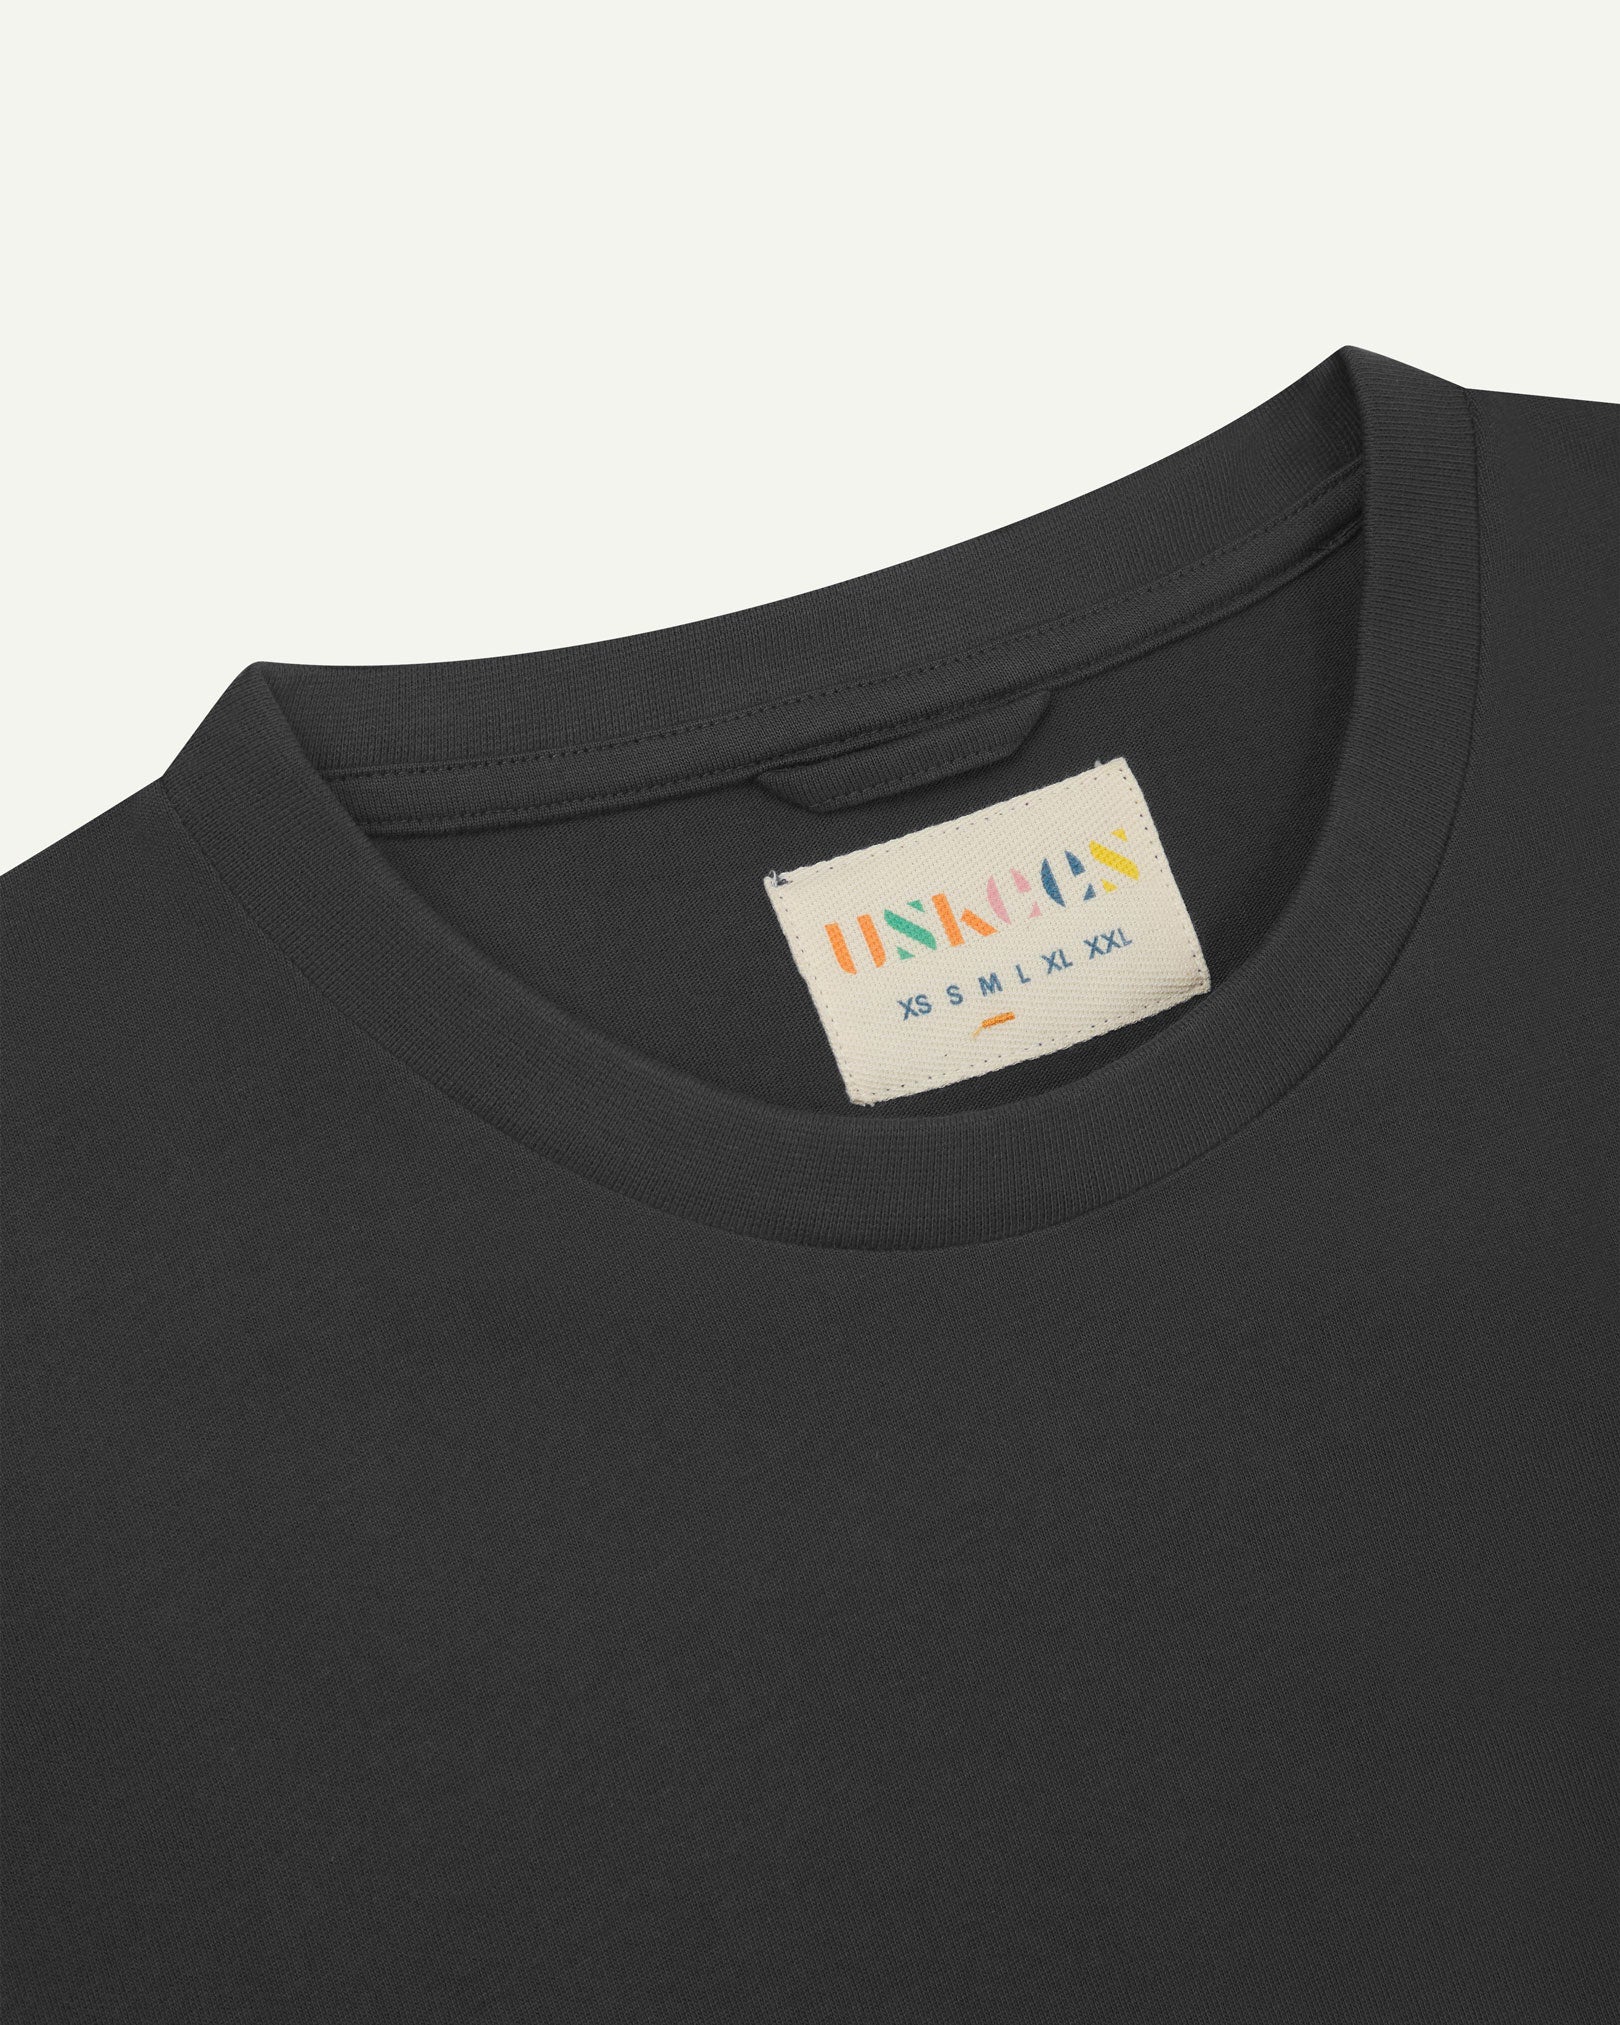 Neckline close-up of Uskees faded black organic cotton T-shirt showing hanging loop and branding label.